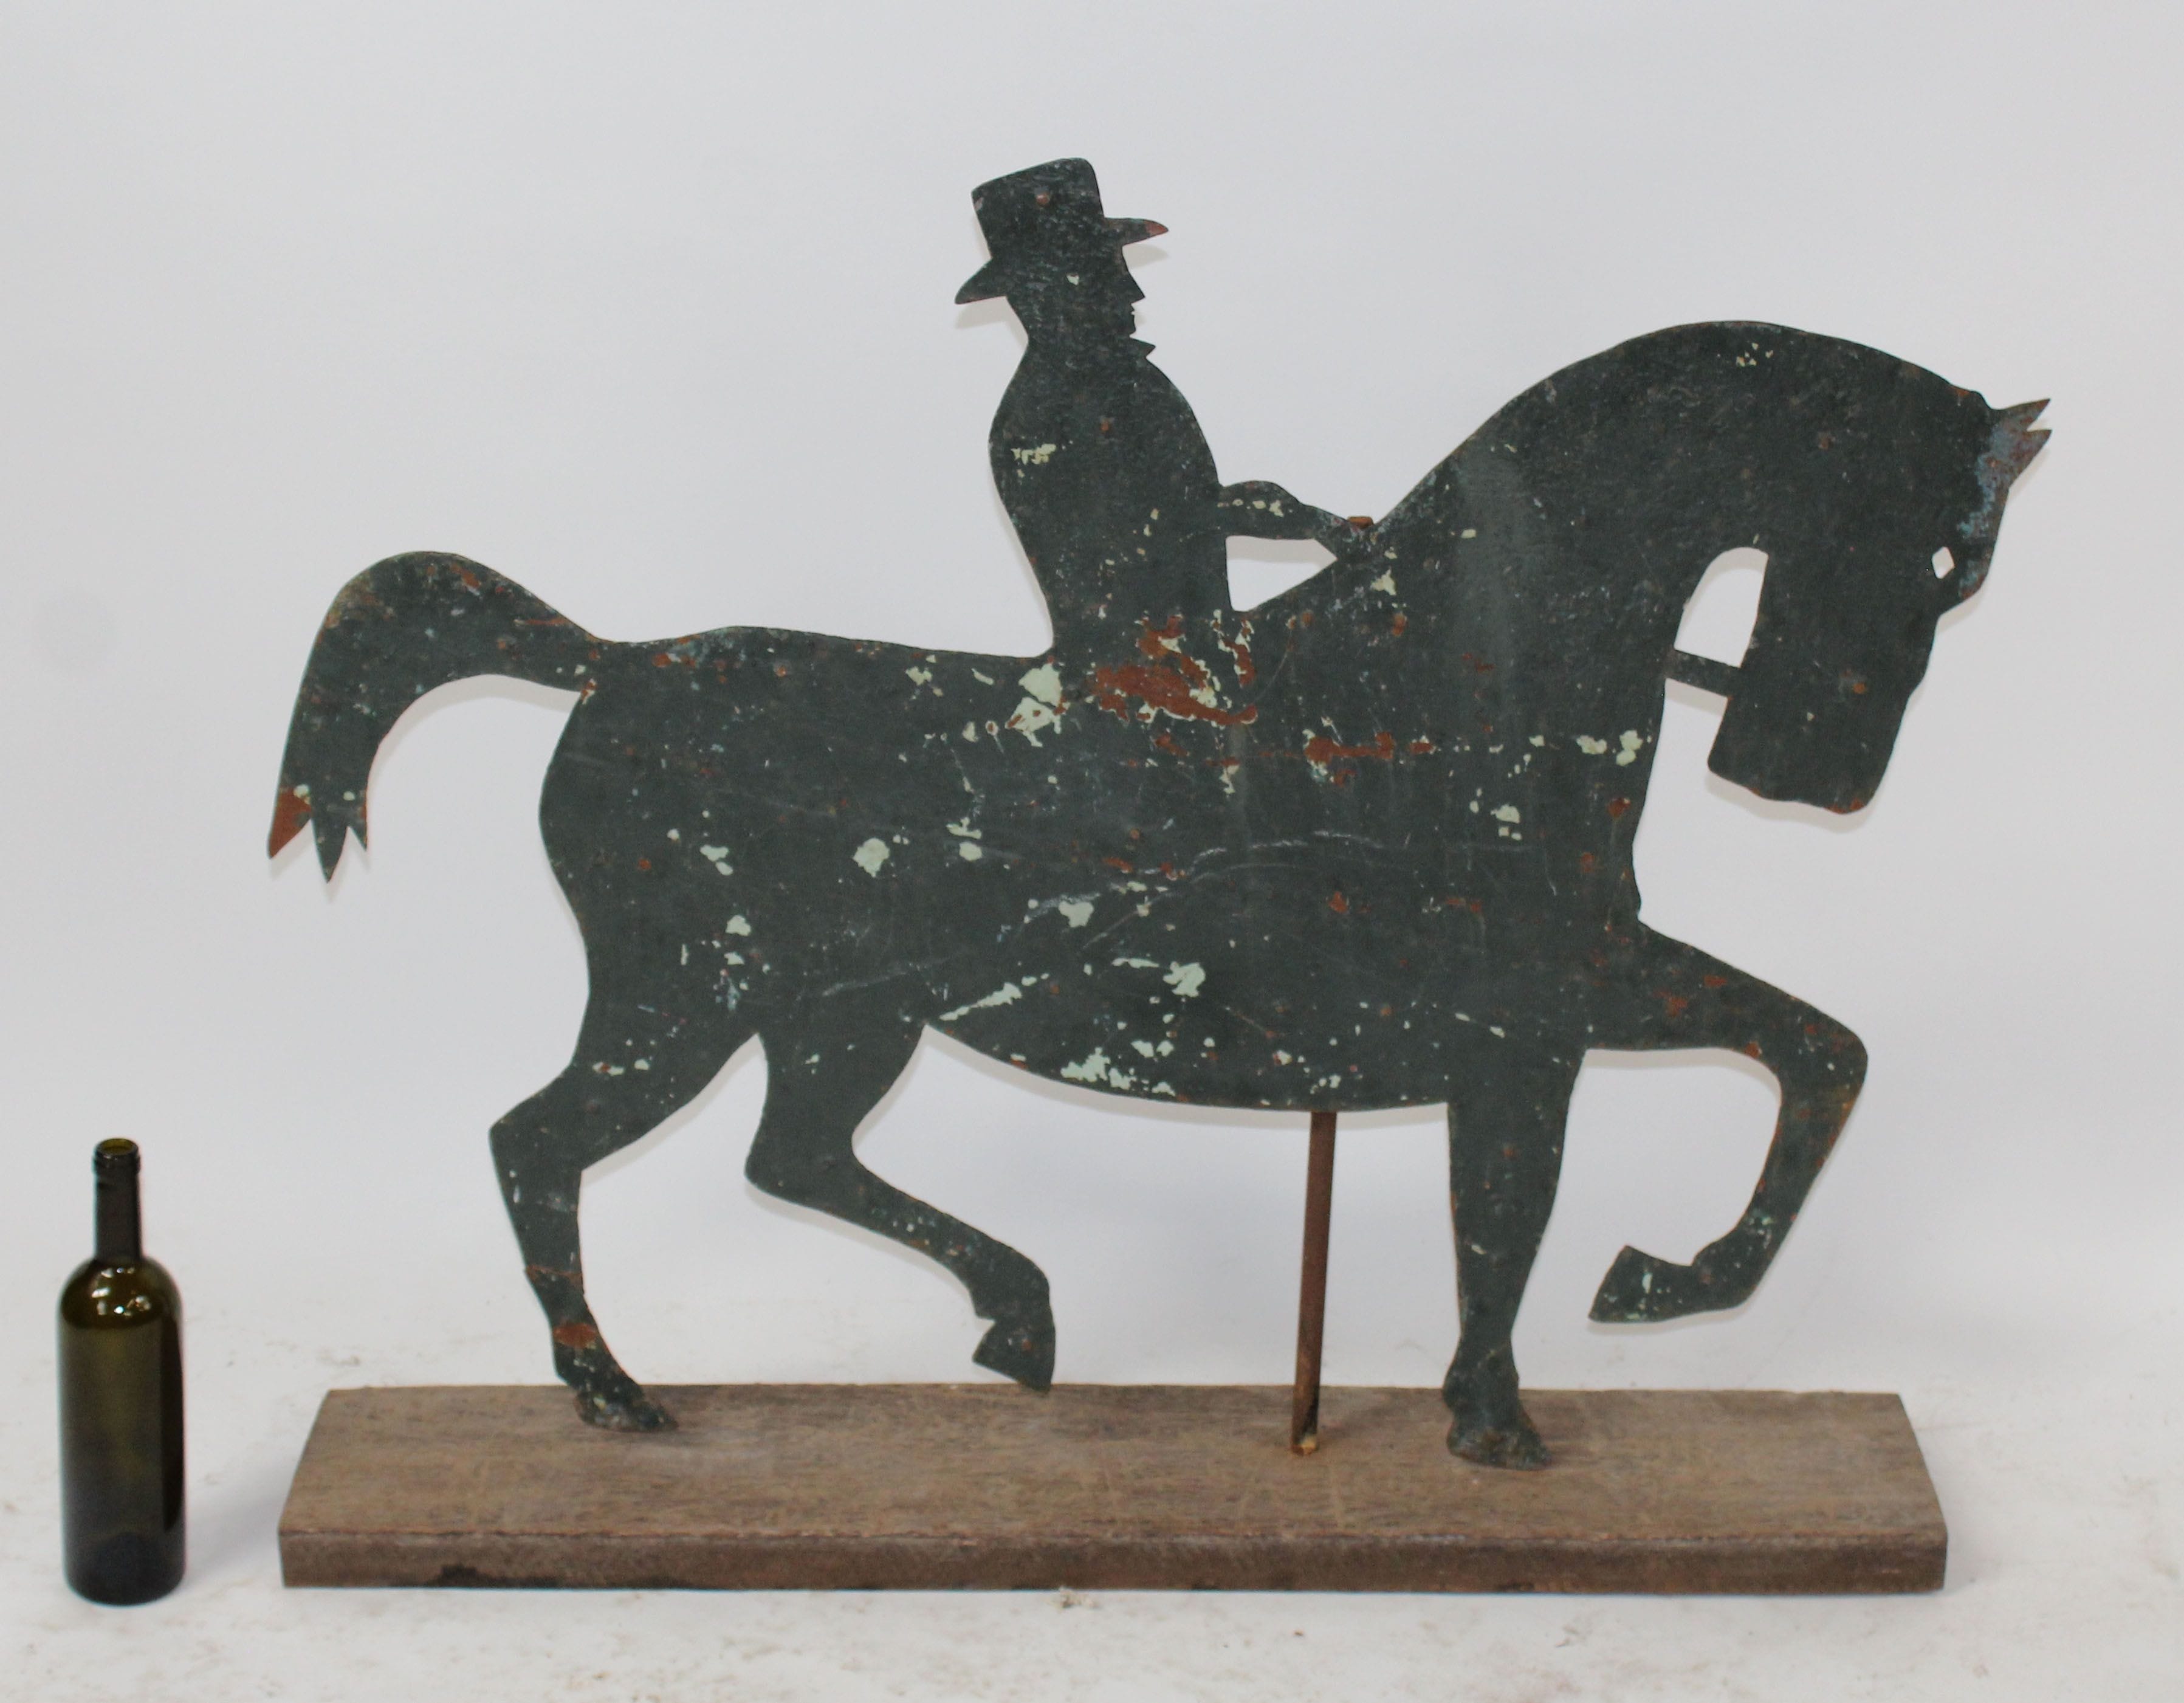 French 19th c iron trade sign with horse and rider